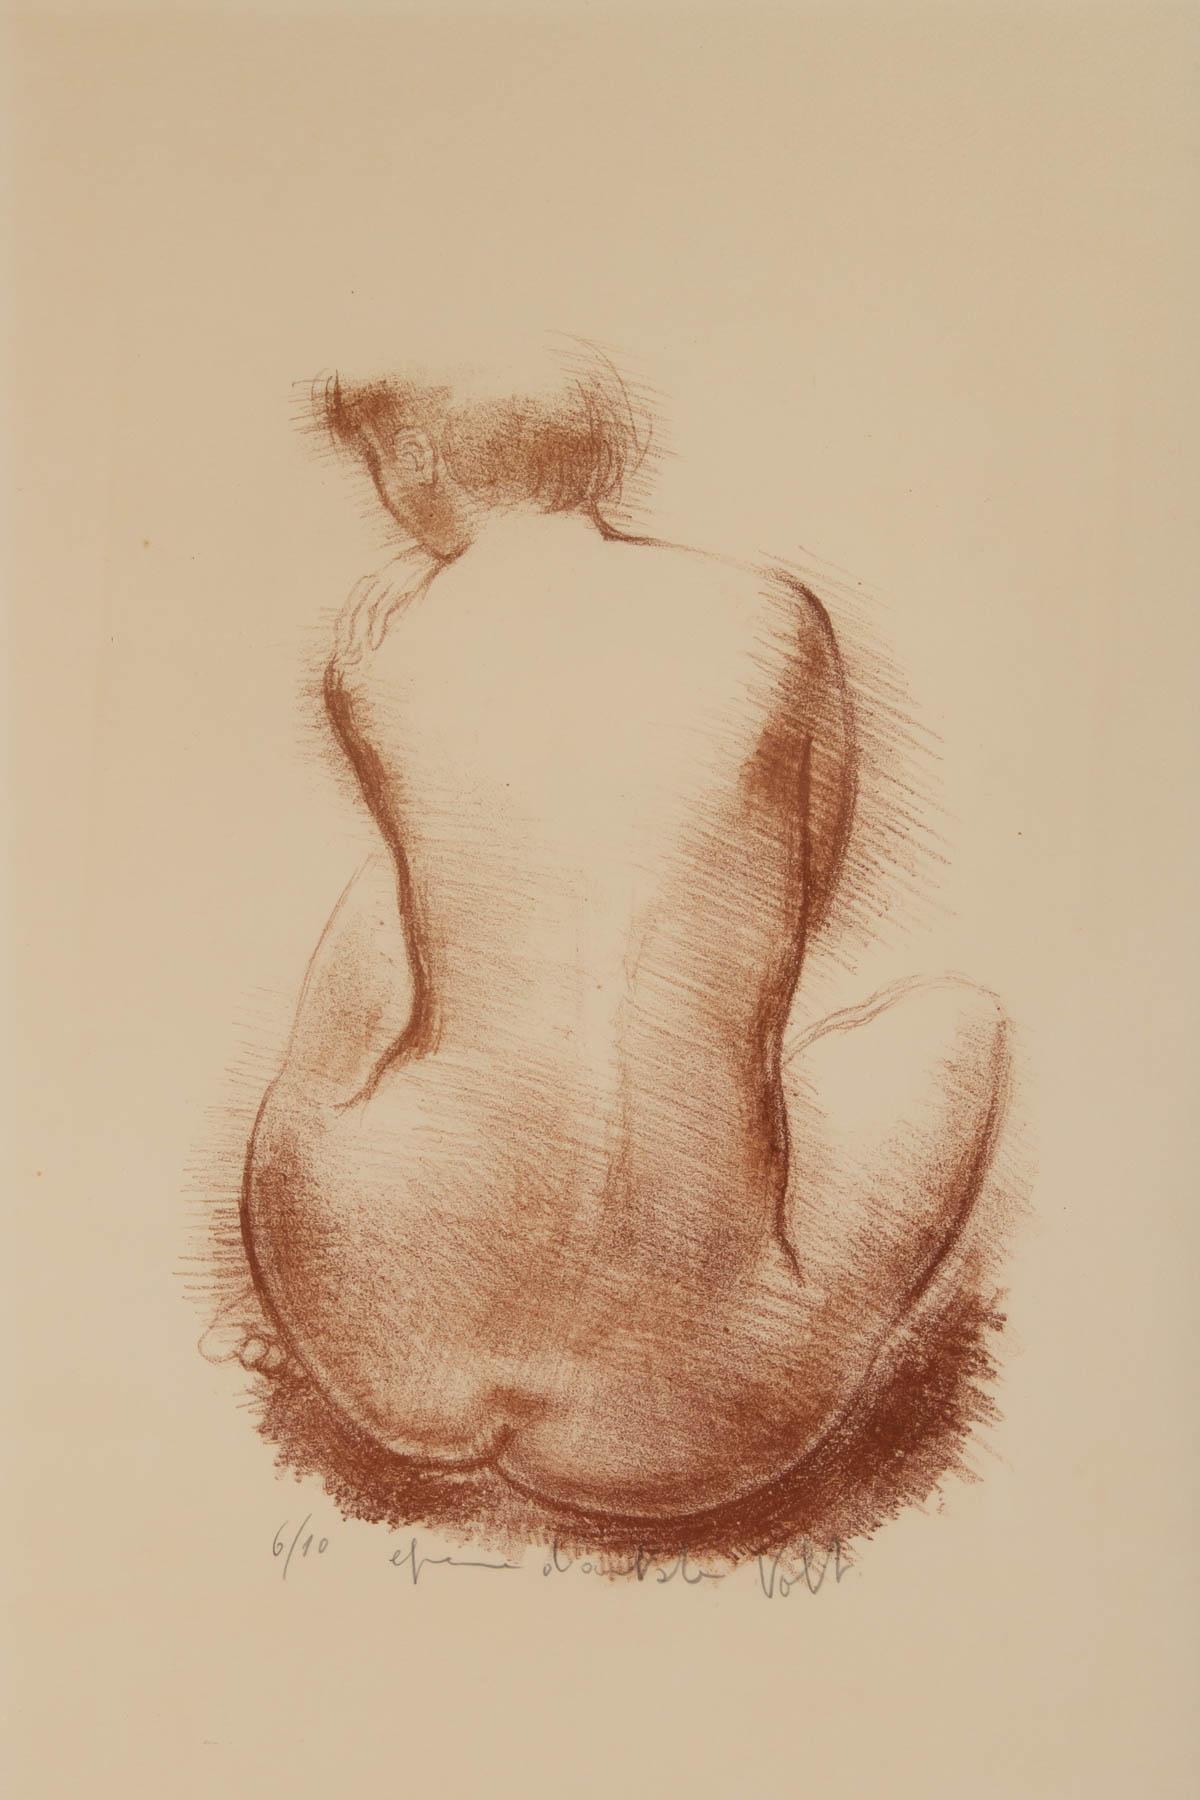 Lithograph from Volti, 6/10, artist proof representative a nude woman from back, framed
Measures: H 70cm, W 52cm, D 2cm.